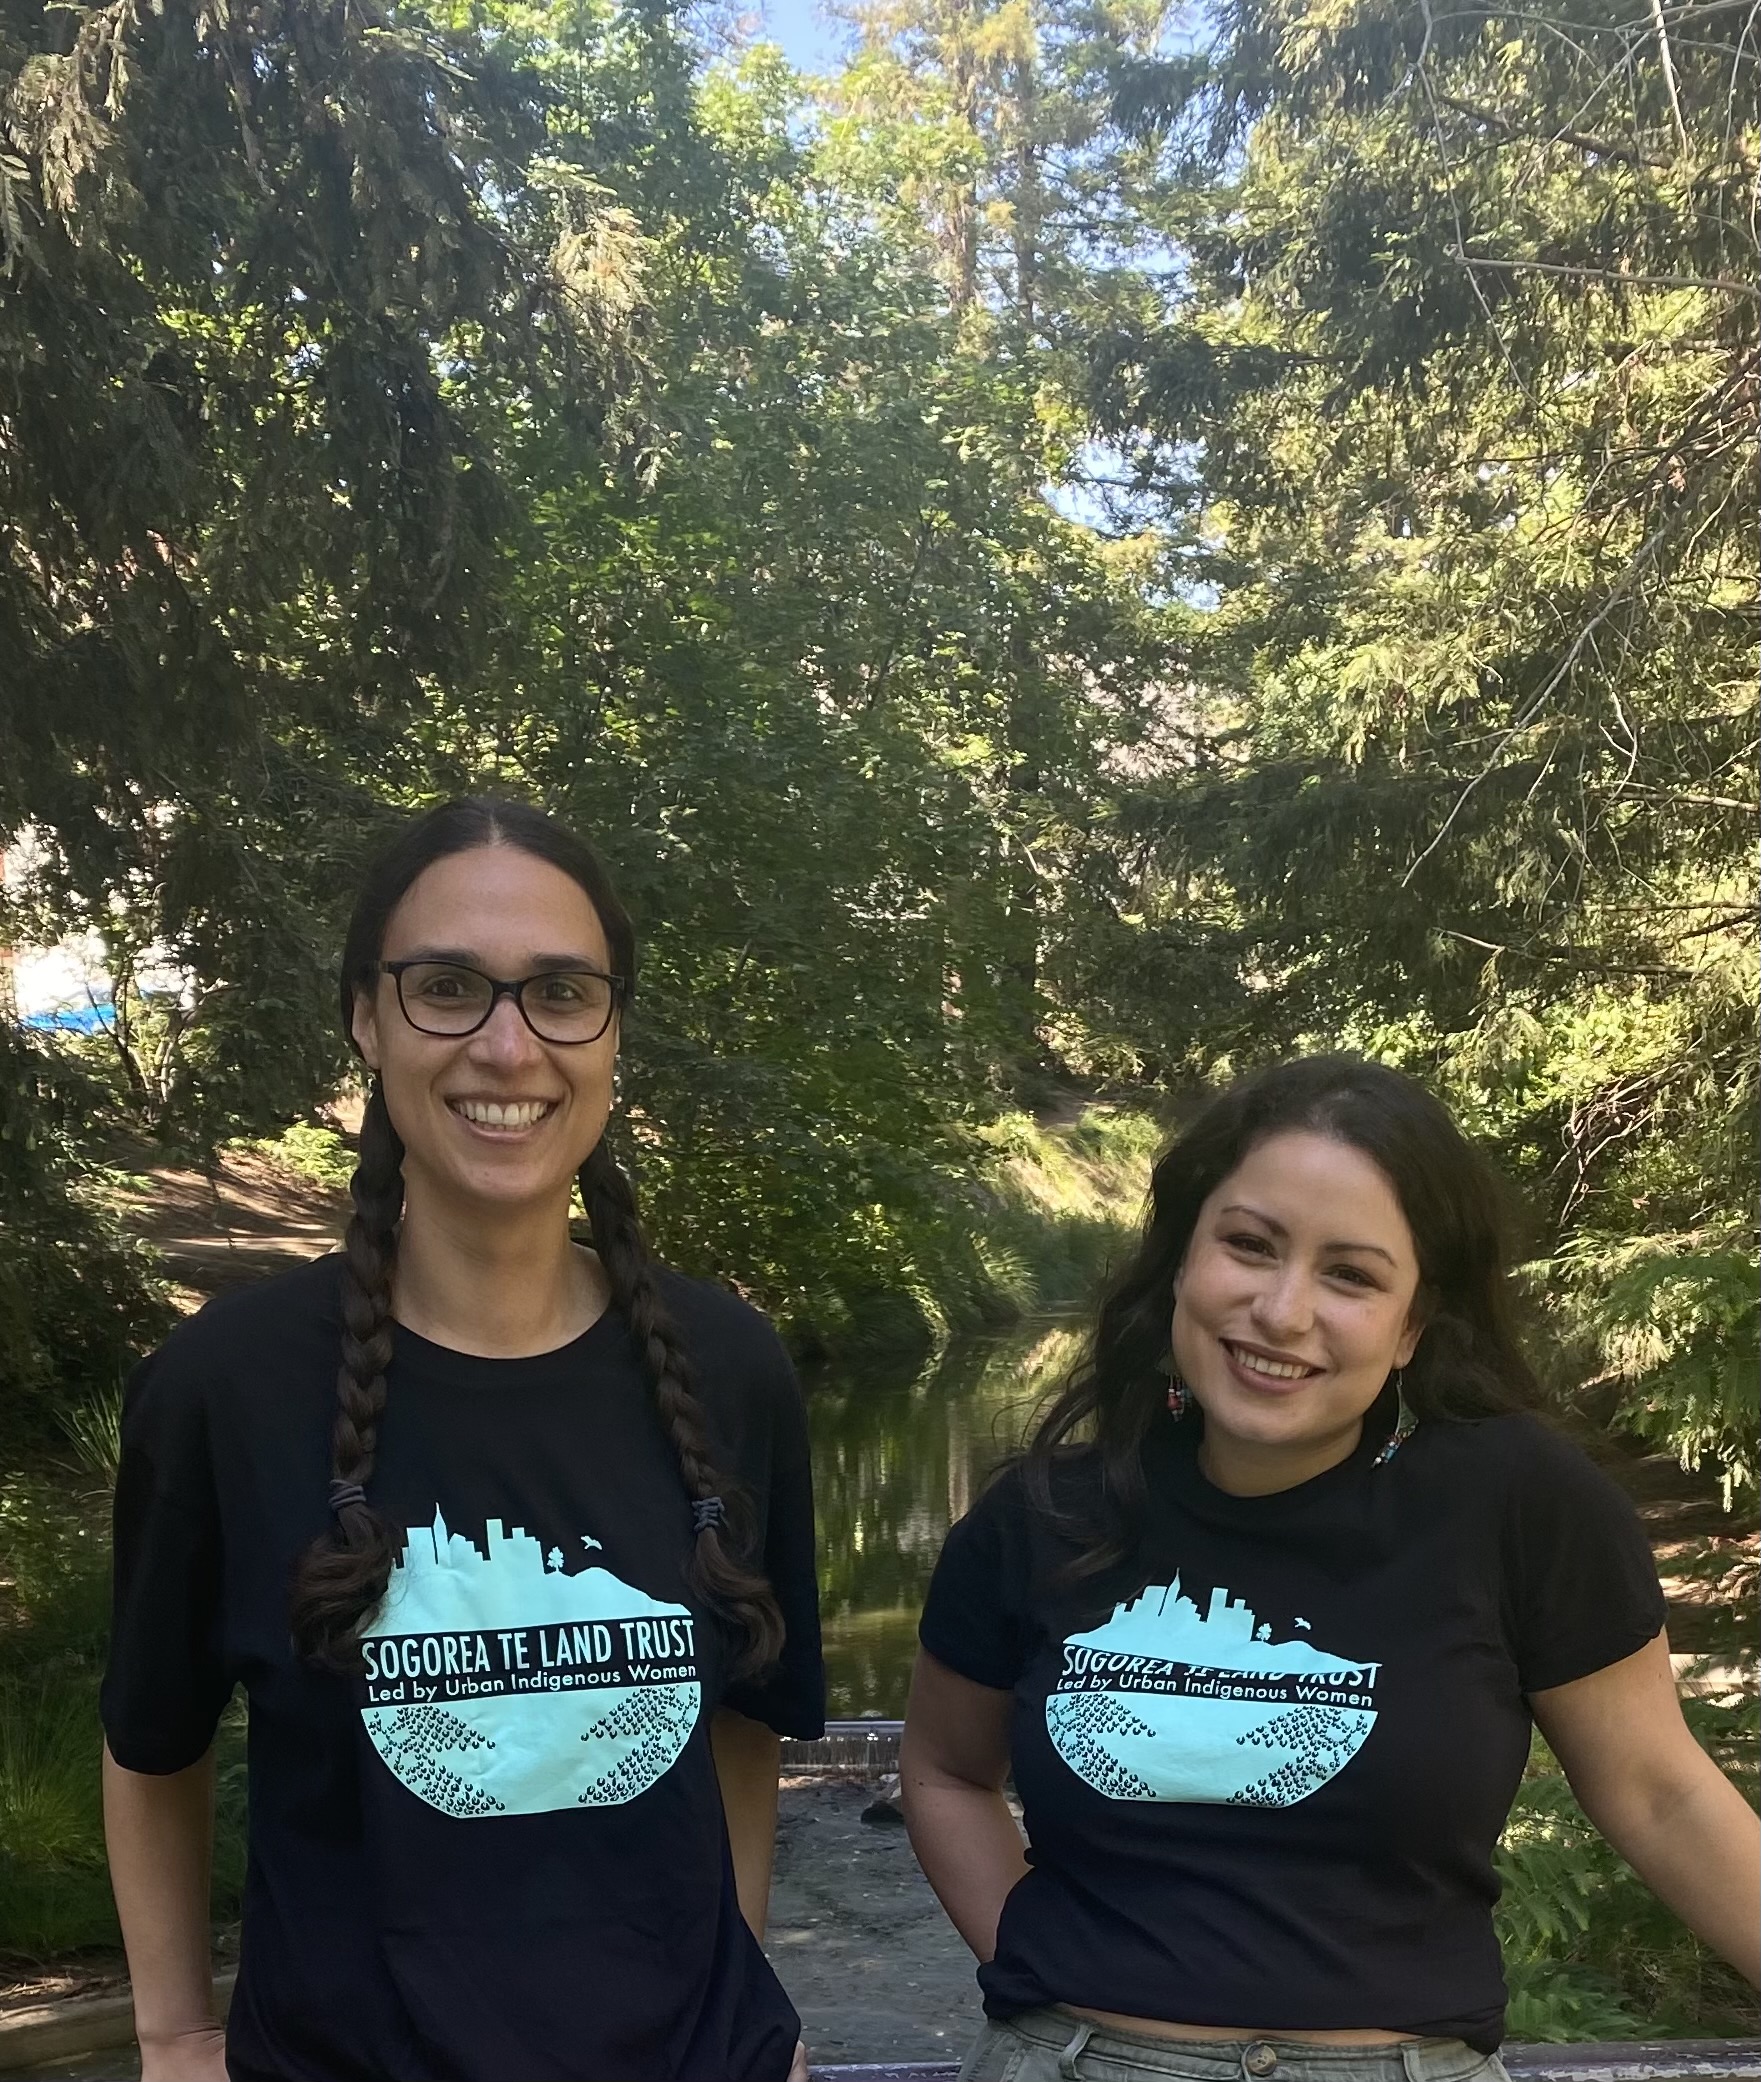 two women wearing matching shirts pose outside for a photo